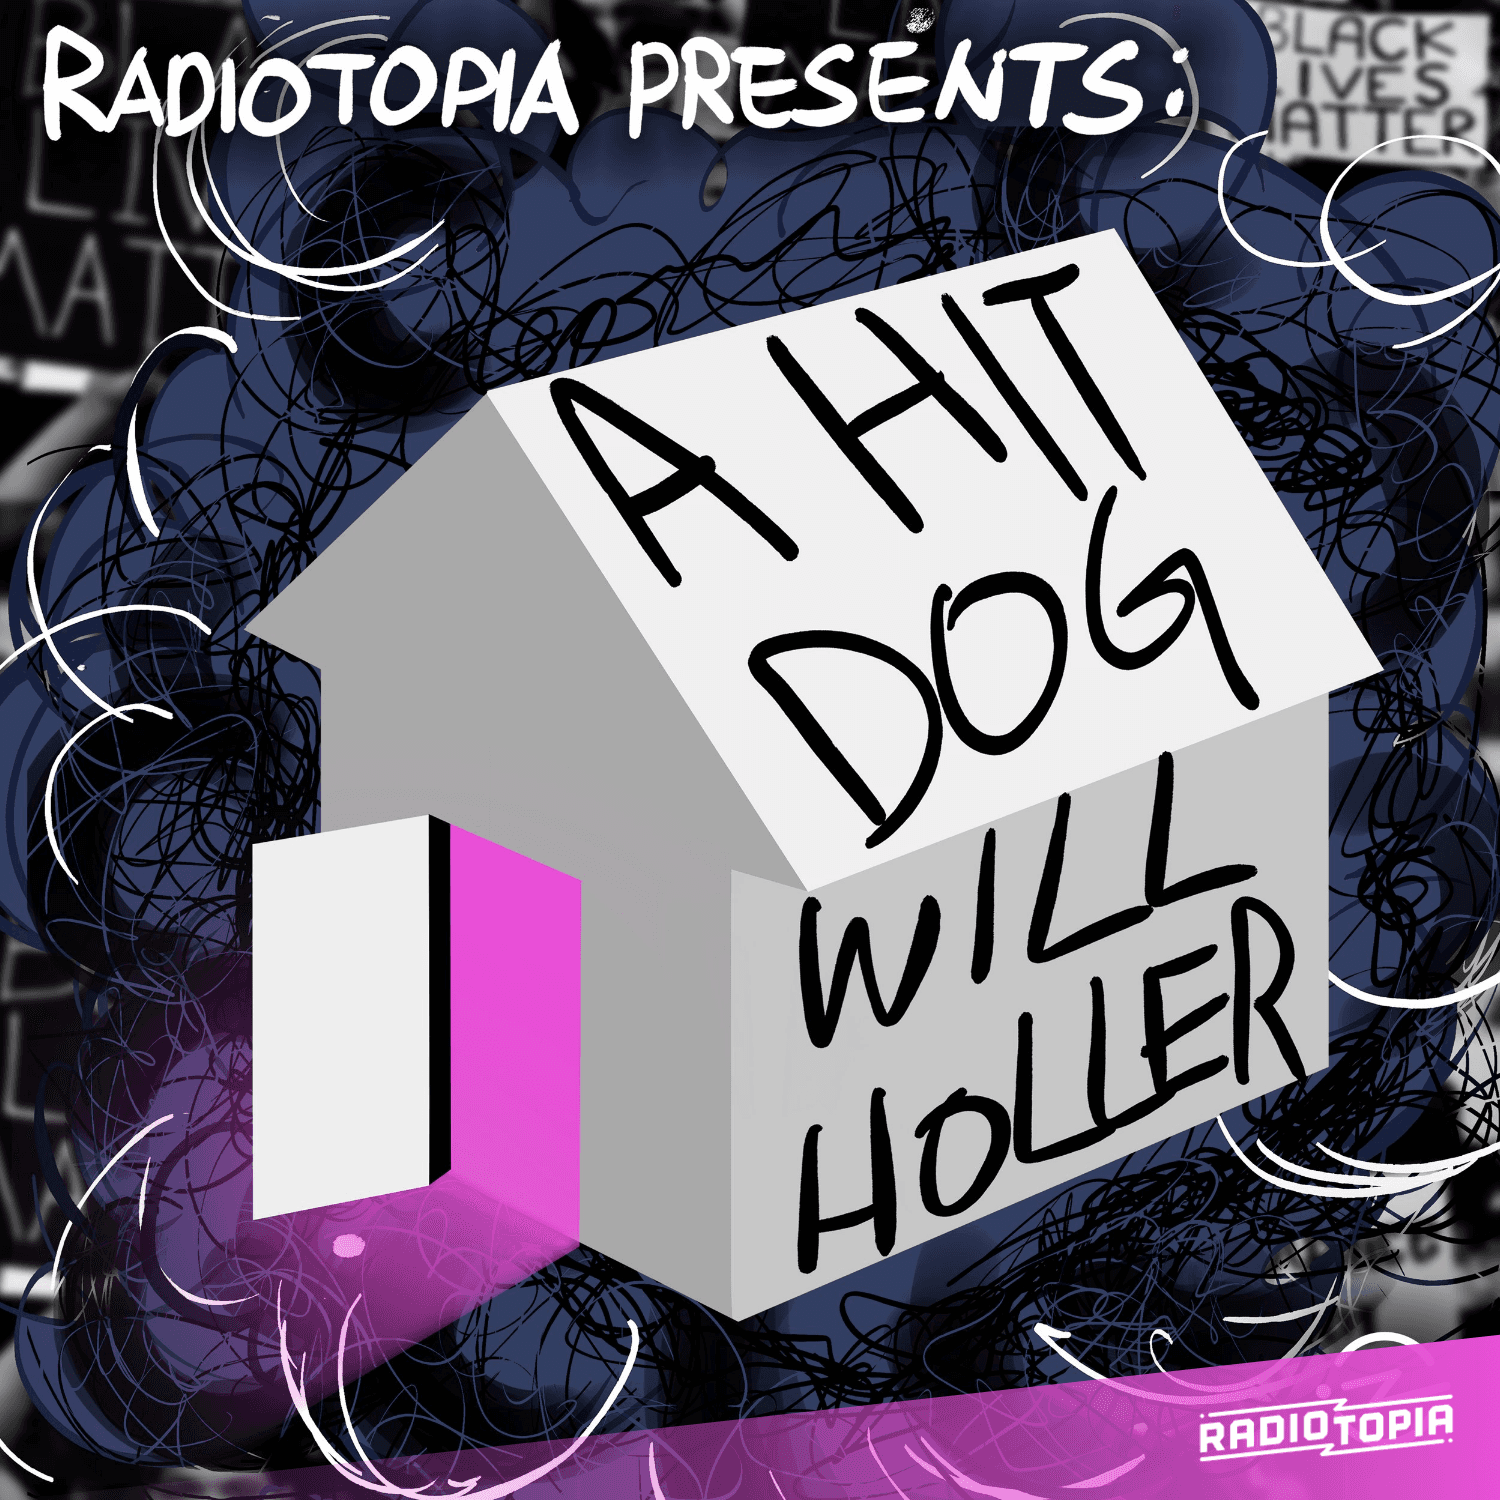 Thumbnail for "Radiotopia Presents: a hit dog will holler".